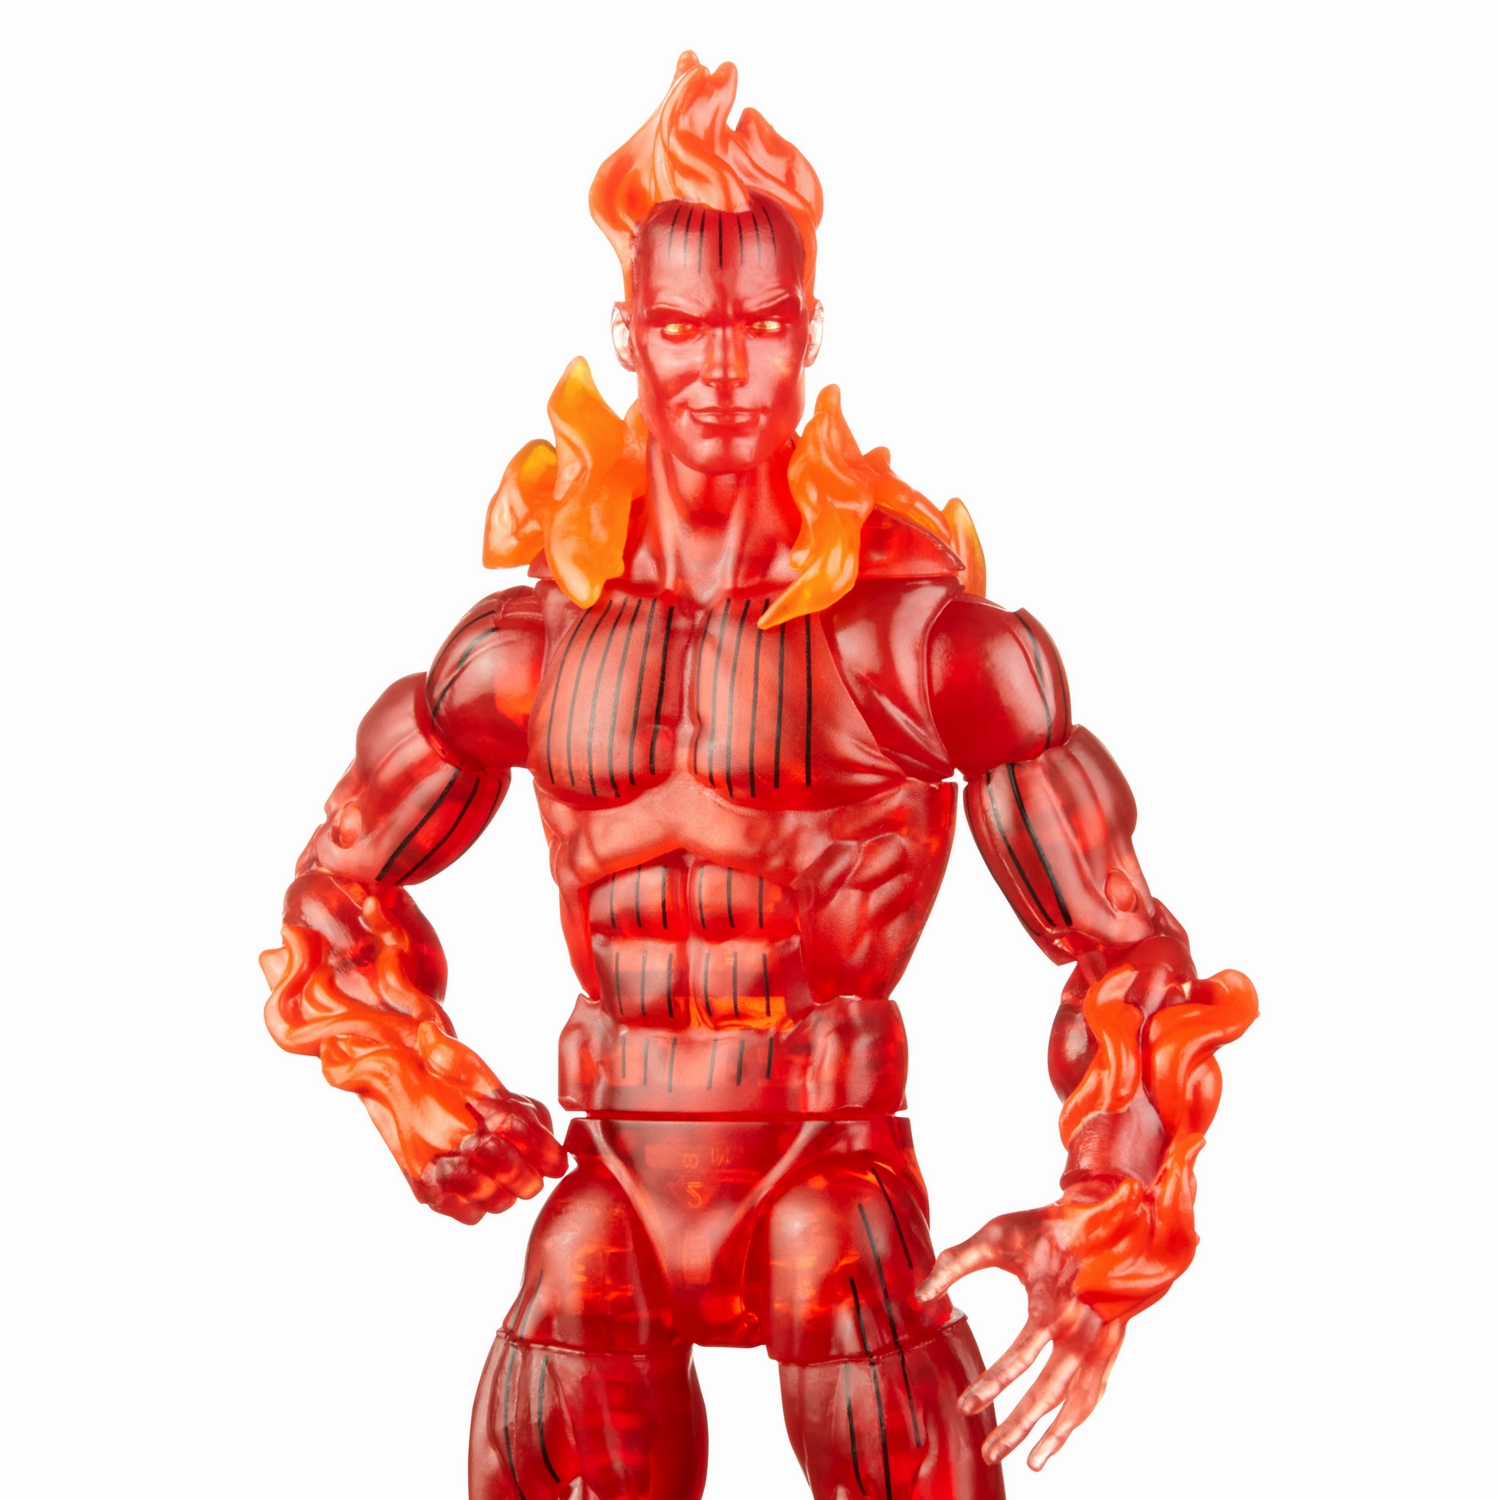 MARVEL LEGENDS SERIES 6-INCH RETRO FANTASTIC FOUR THE HUMAN TORCH Figure_oop 2.jpg